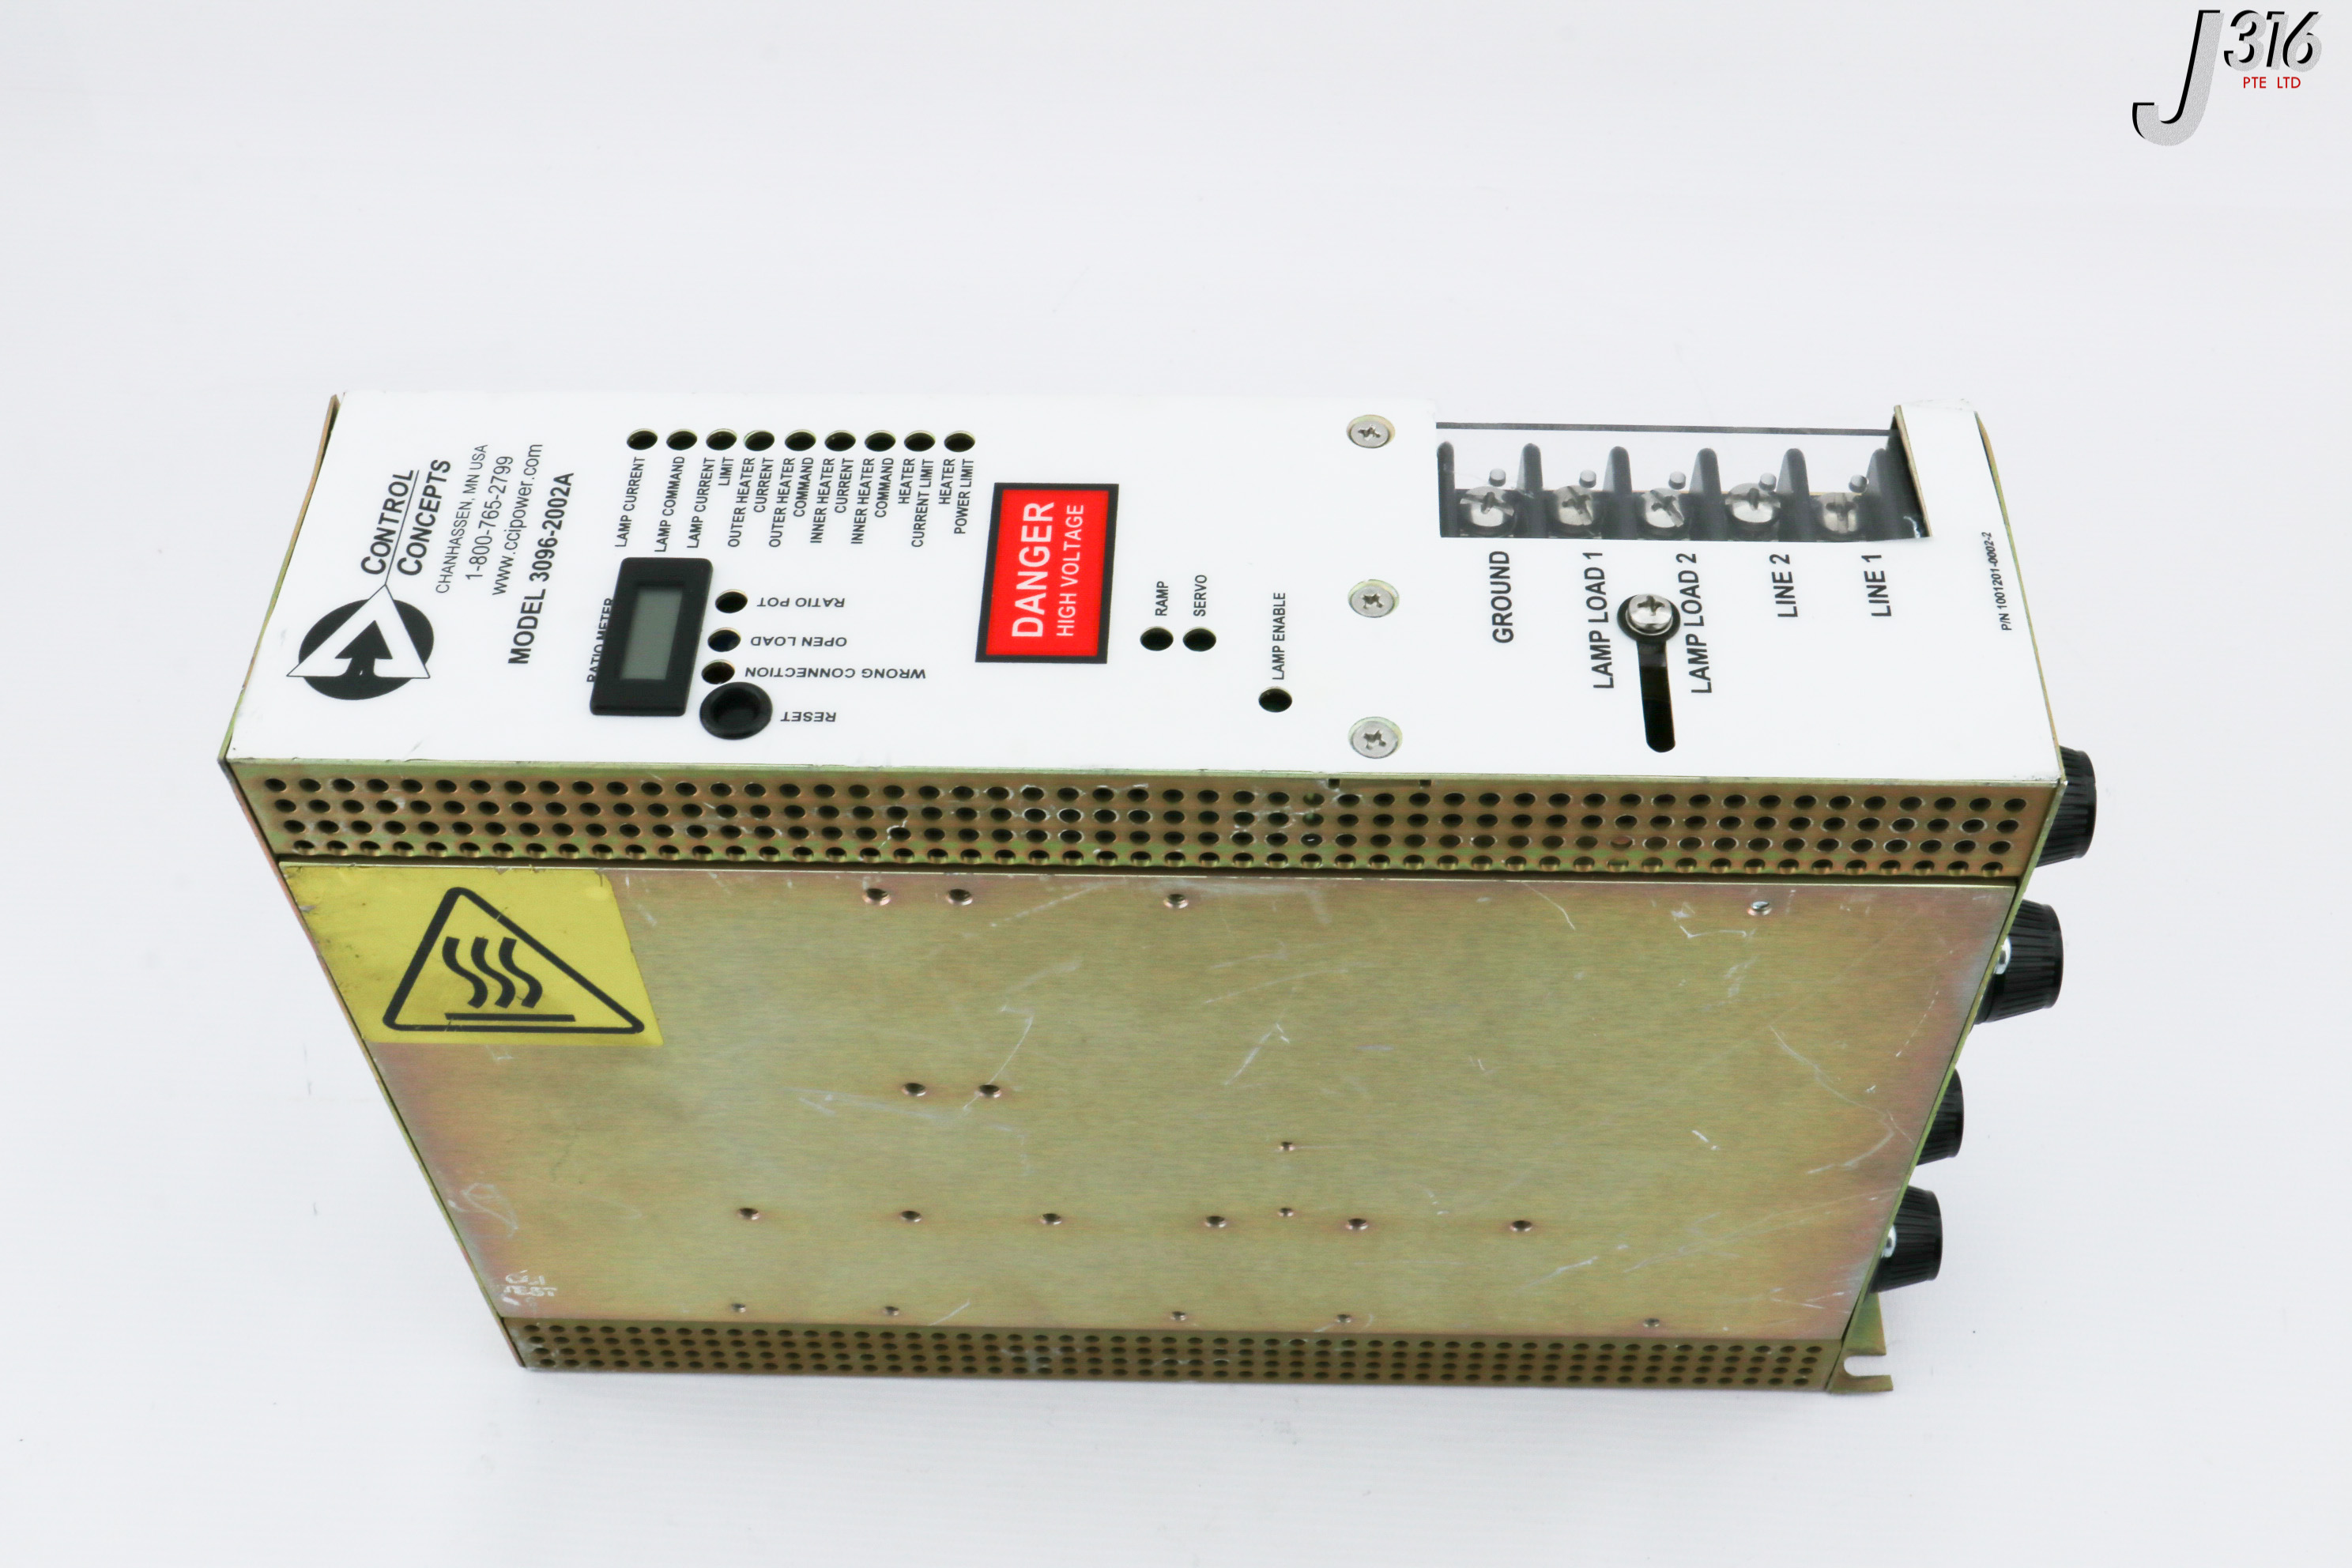 29756 CONTROL CONCEPTS SCR POWER CONTROLLER, AMAT: 0190-43083 3096-2002A  J316Gallery